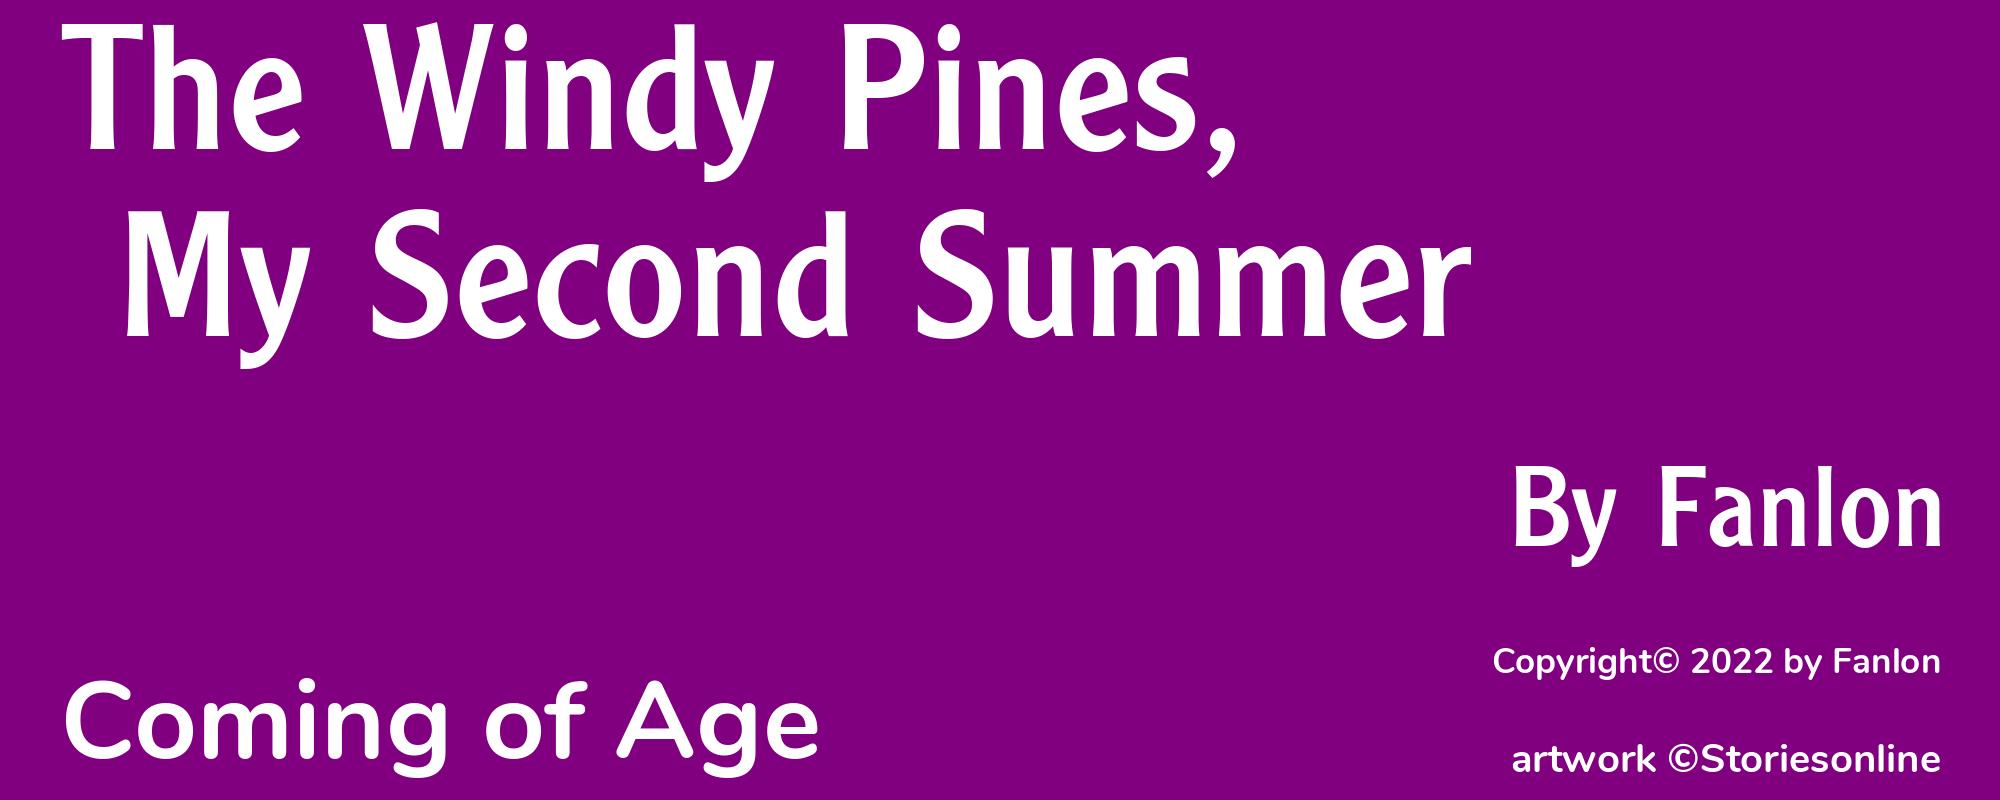 The Windy Pines, My Second Summer - Cover